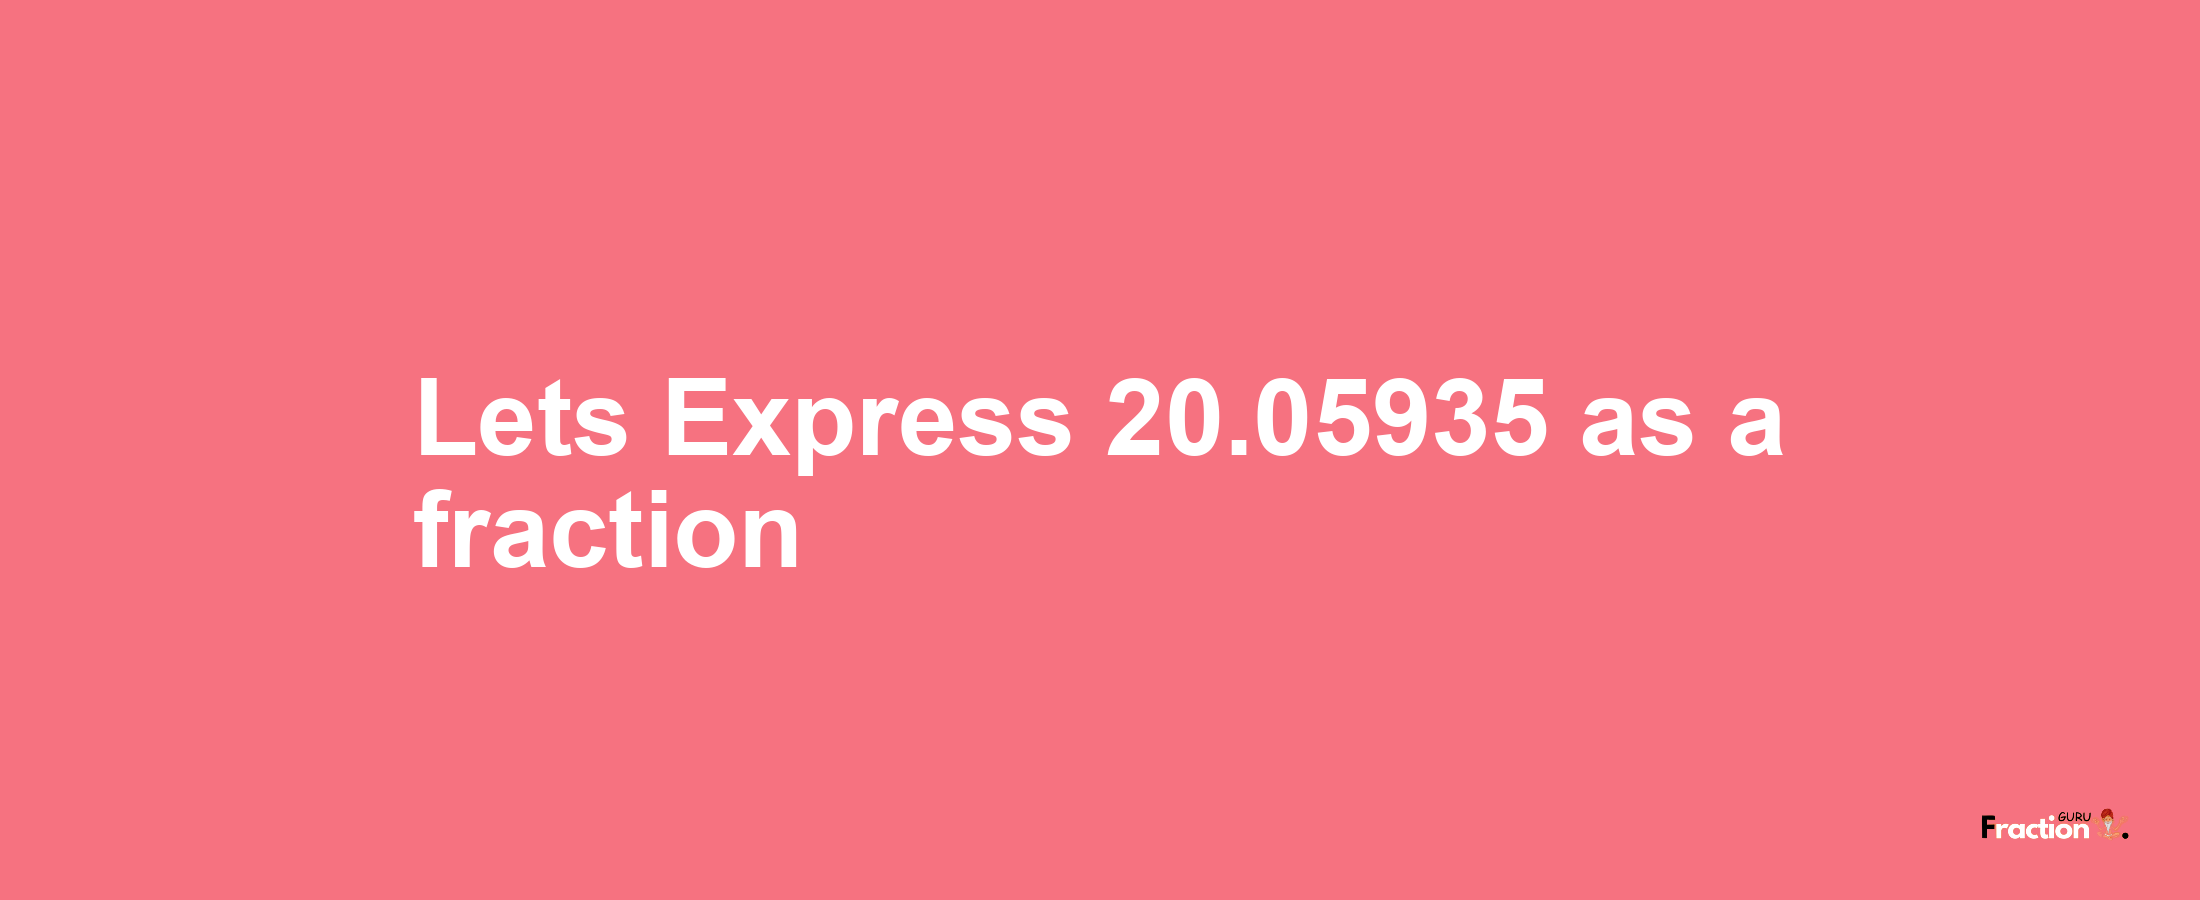 Lets Express 20.05935 as afraction